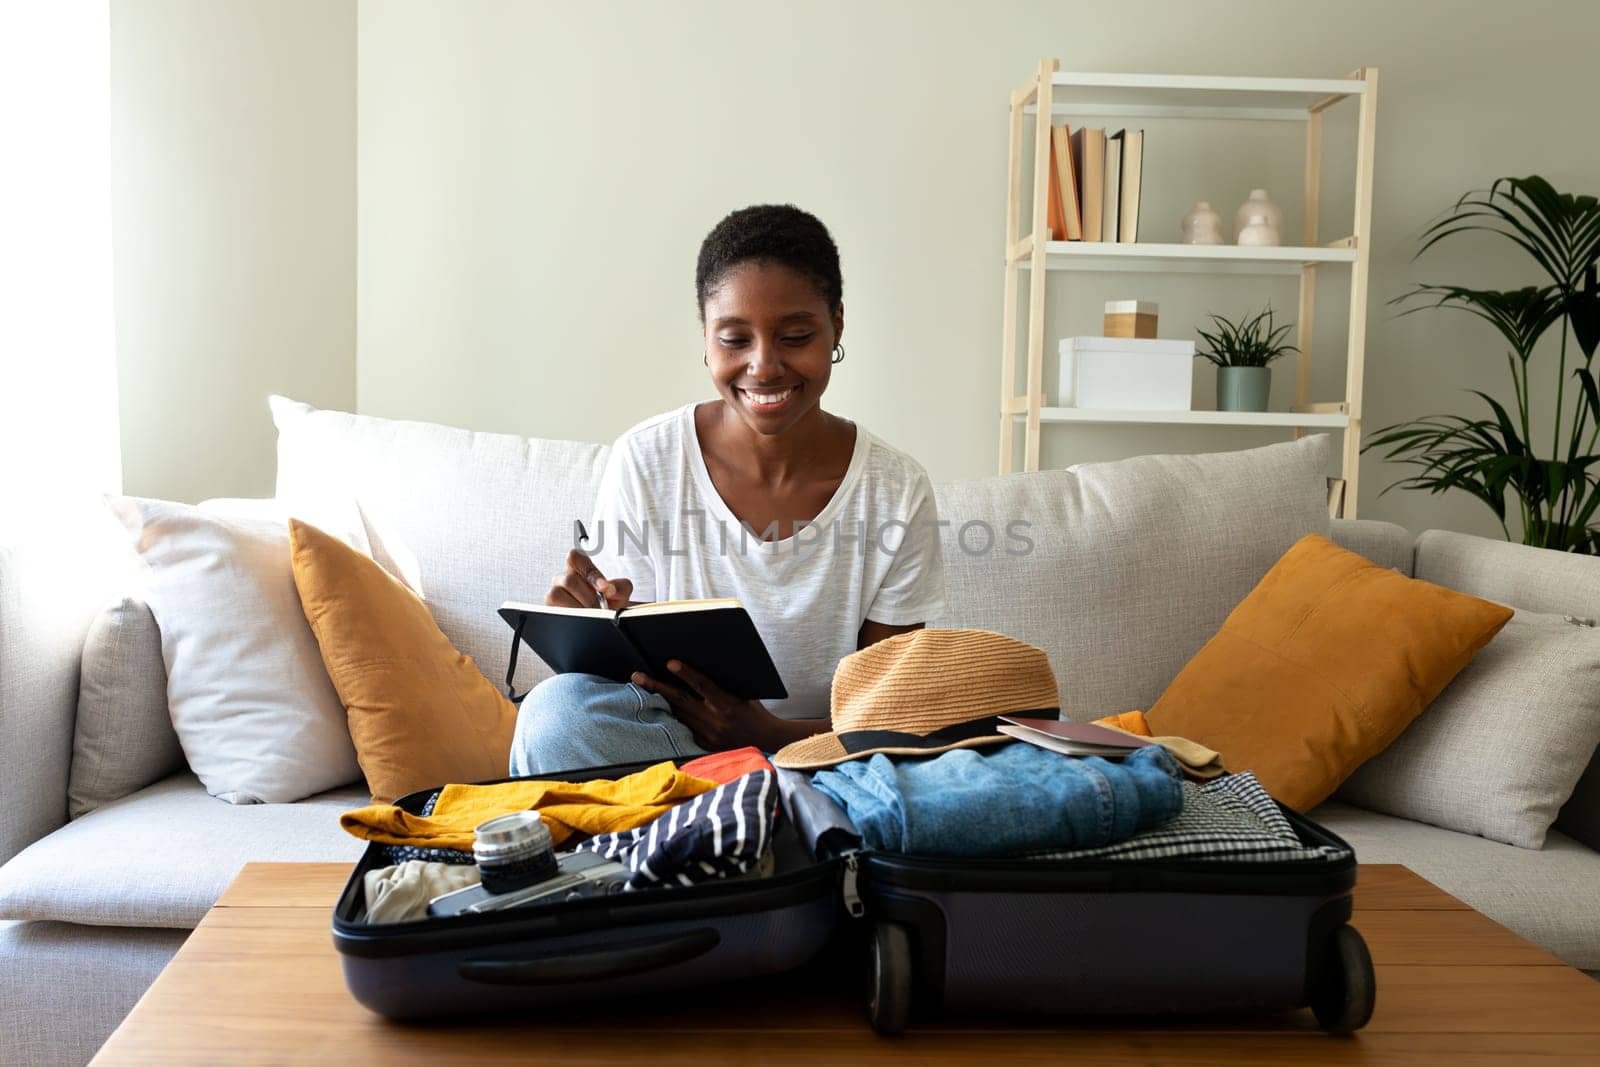 Young African American woman sitting on sofa checking packing list before summer holidays. Preparing suitcase for vacations. Vacation concept.